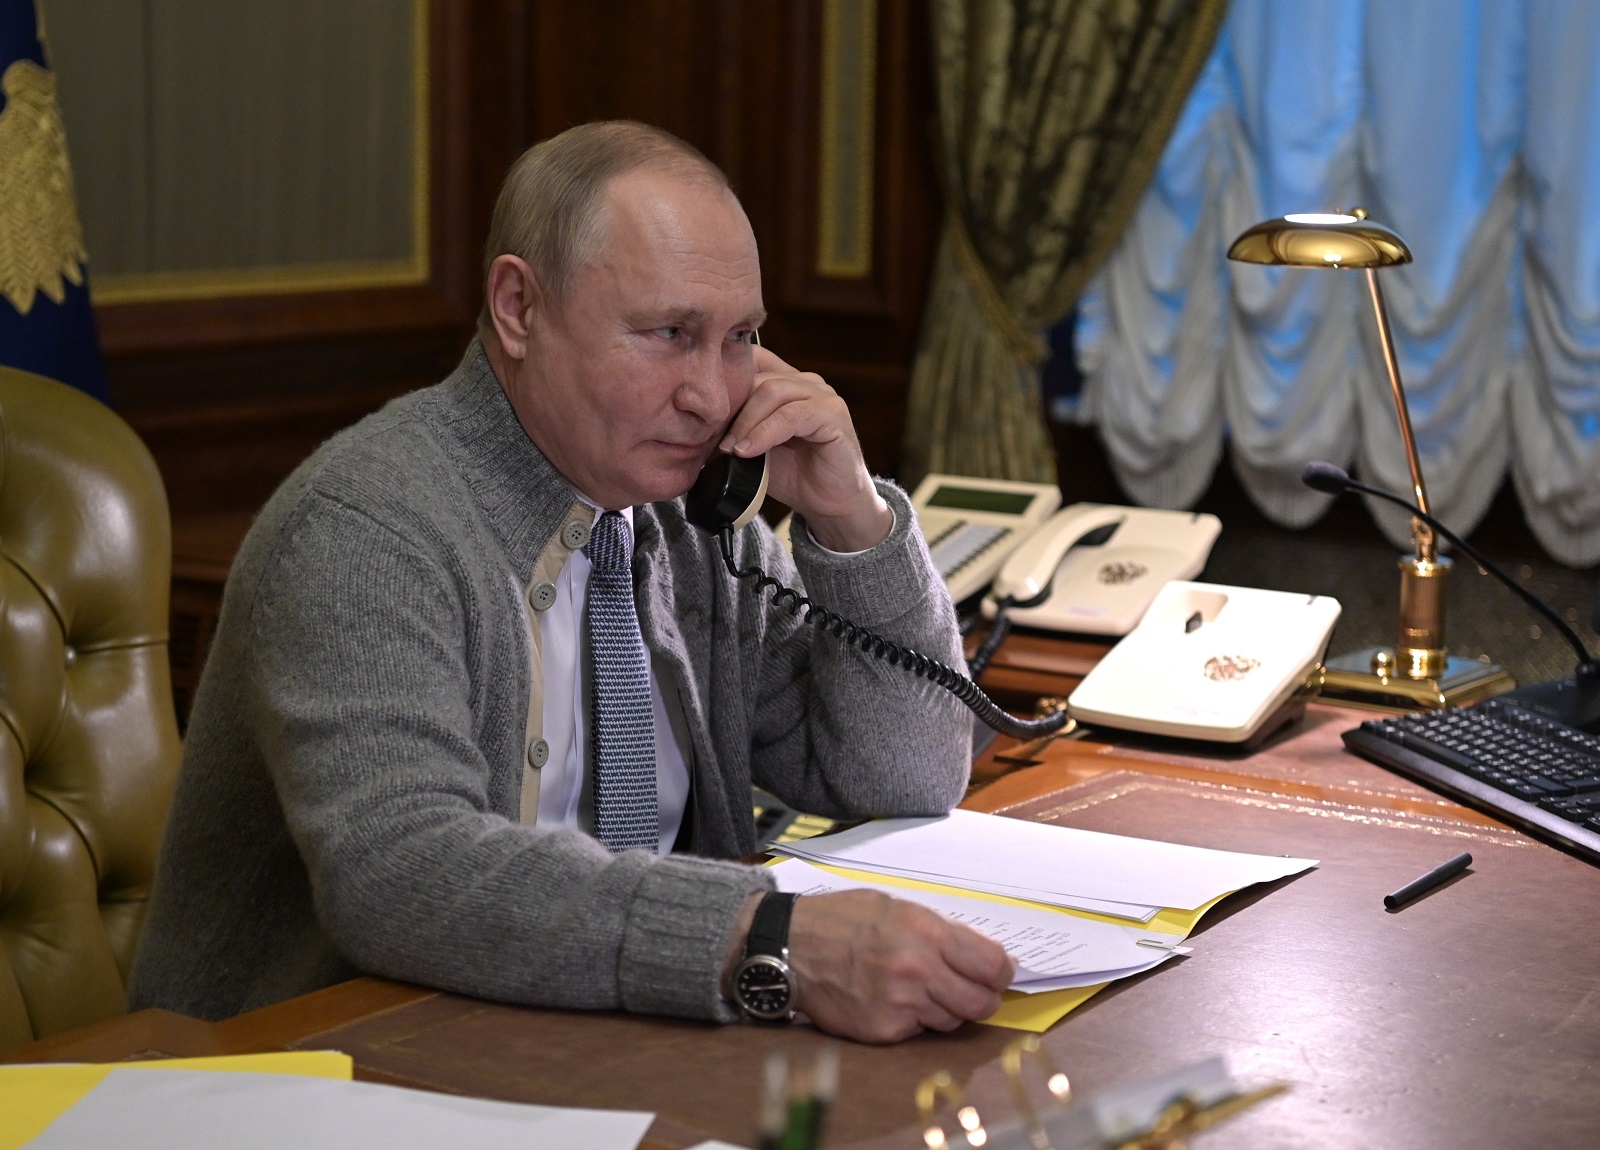 epa09658095 Russian President Vladimir Putin speaks on the phone with participants of 'Fir Tree of Wishes' campaign in Strelna, outside St. Petersburg, Russia, 27 December 2021. The goal of the campaign is to make the New Year's dreams of orphans, children from low-income families, and disabled kids come true.  EPA/ALEXEI NIKOLSKY/SPUTNIK/KREMLIN POOL / POOL